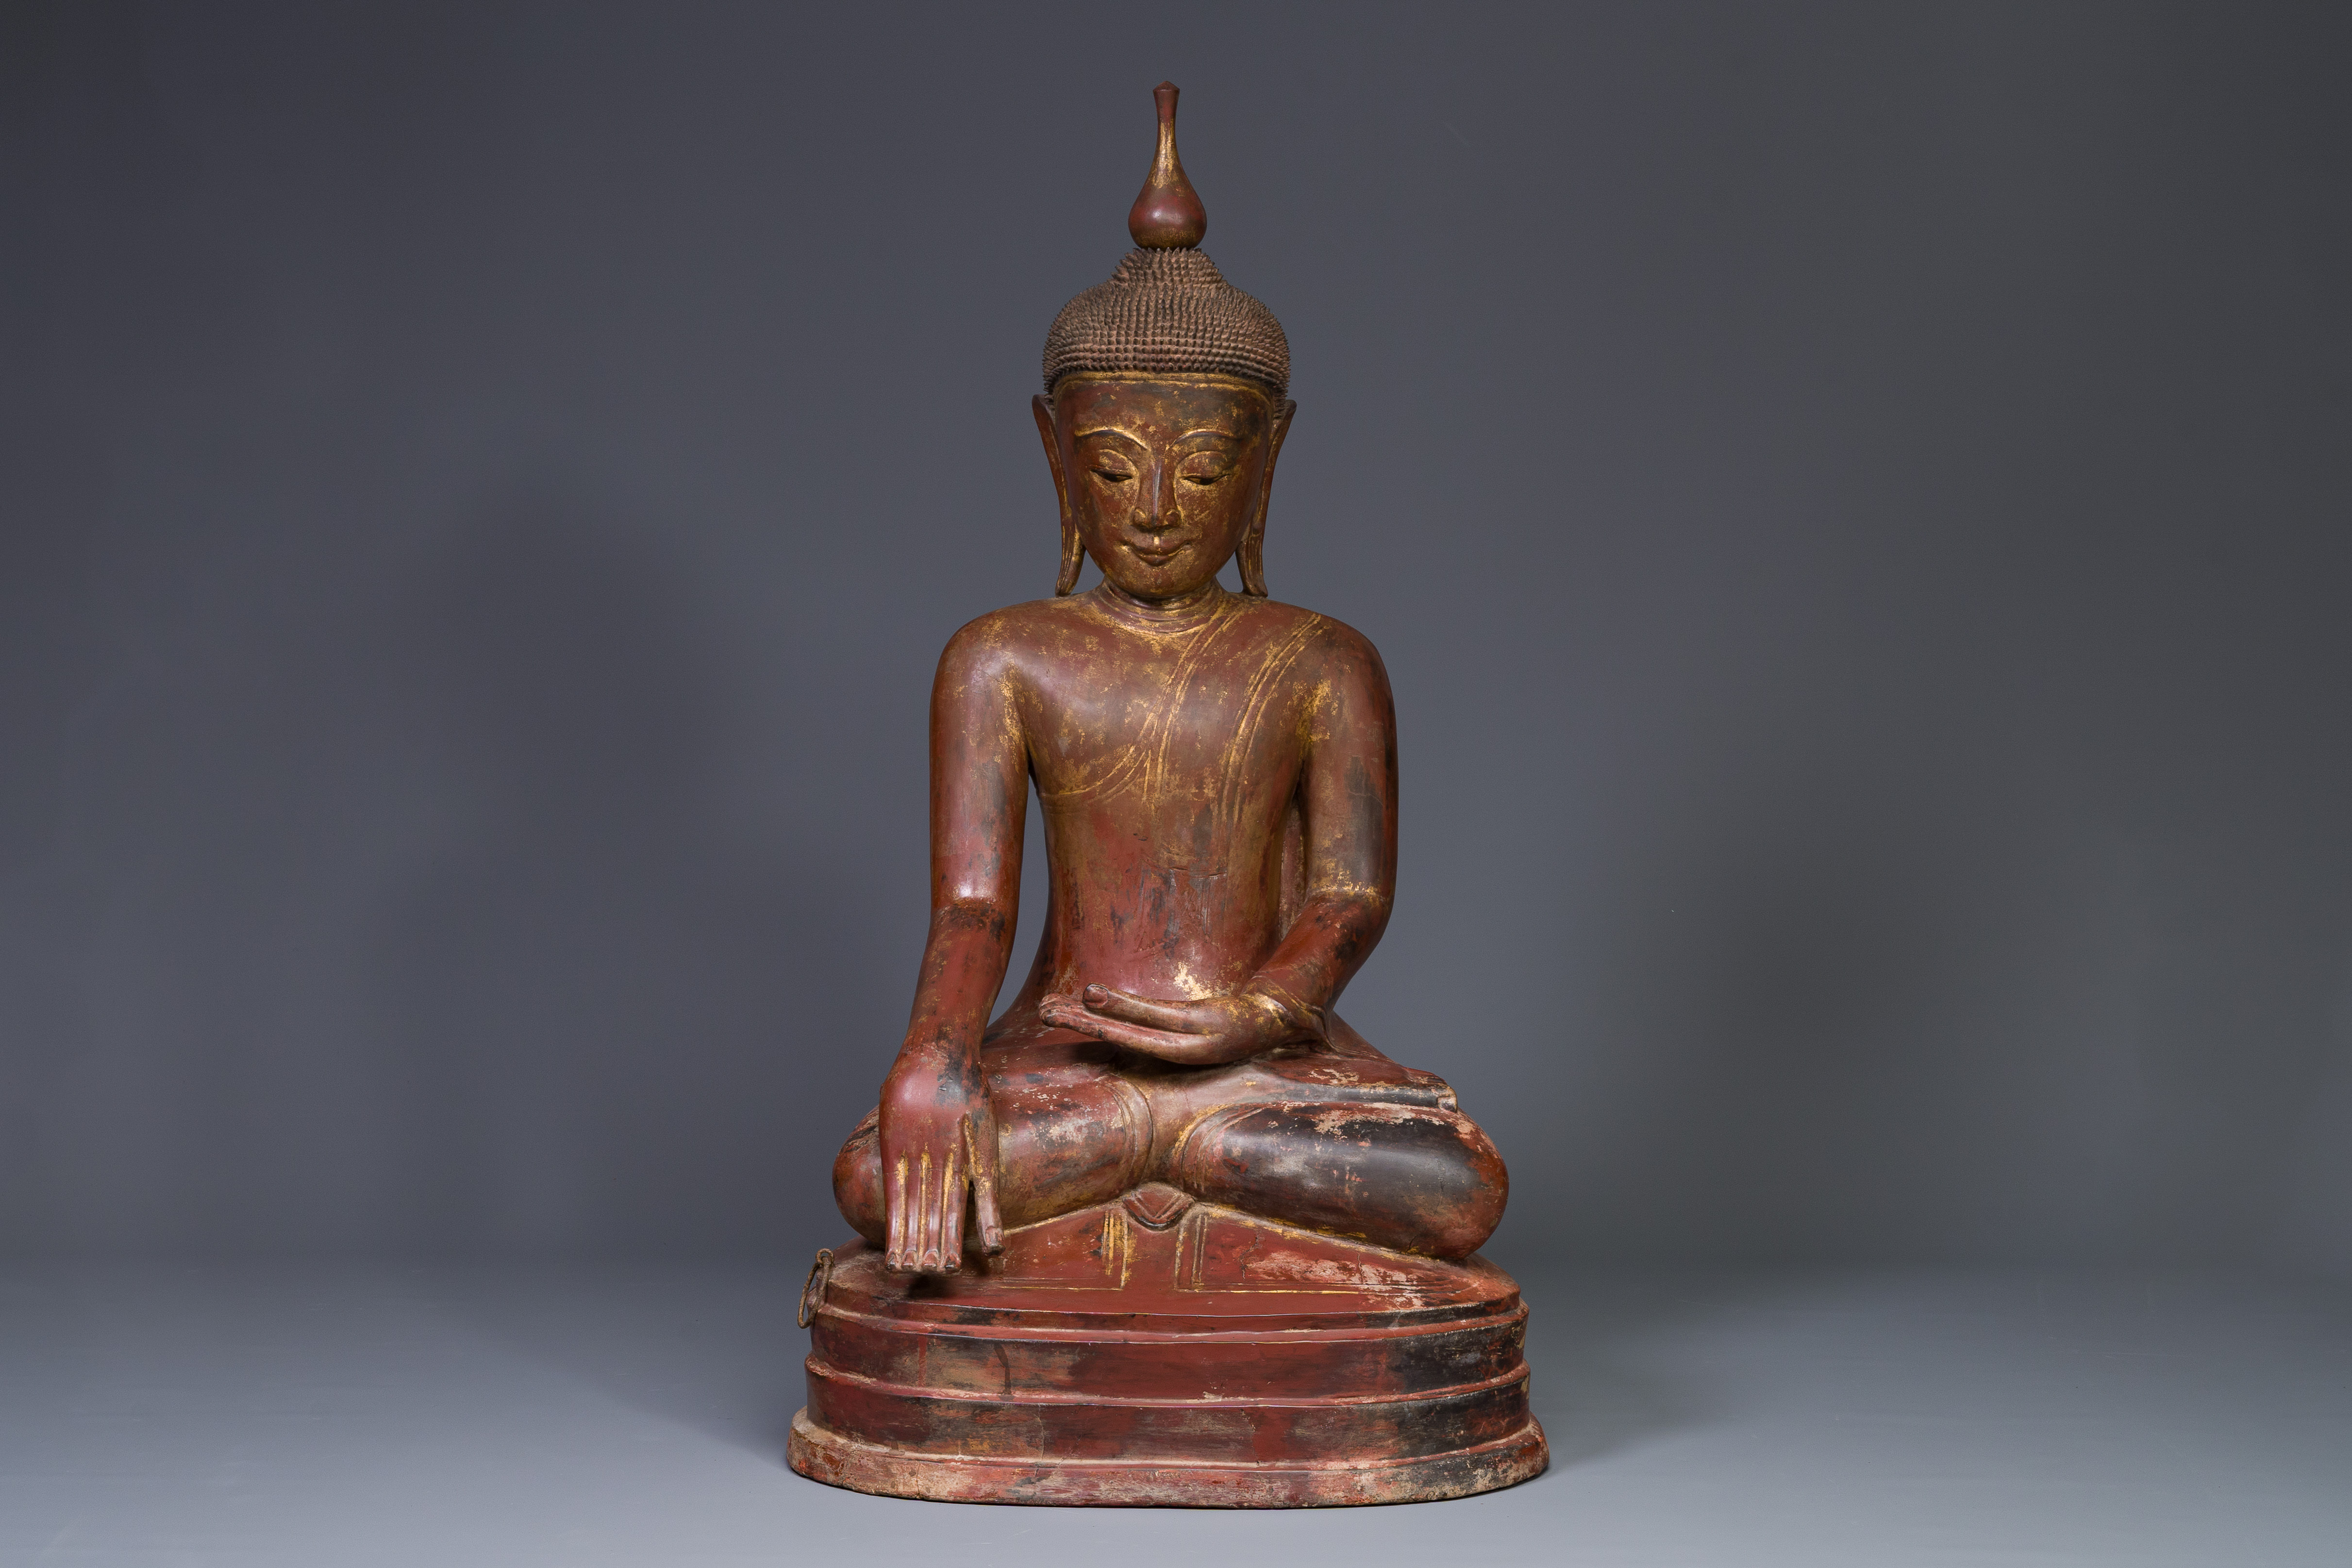 A large Burmese gilded lacquer Buddha in bhumisparsha mudra, 19/20th C. - Image 3 of 18